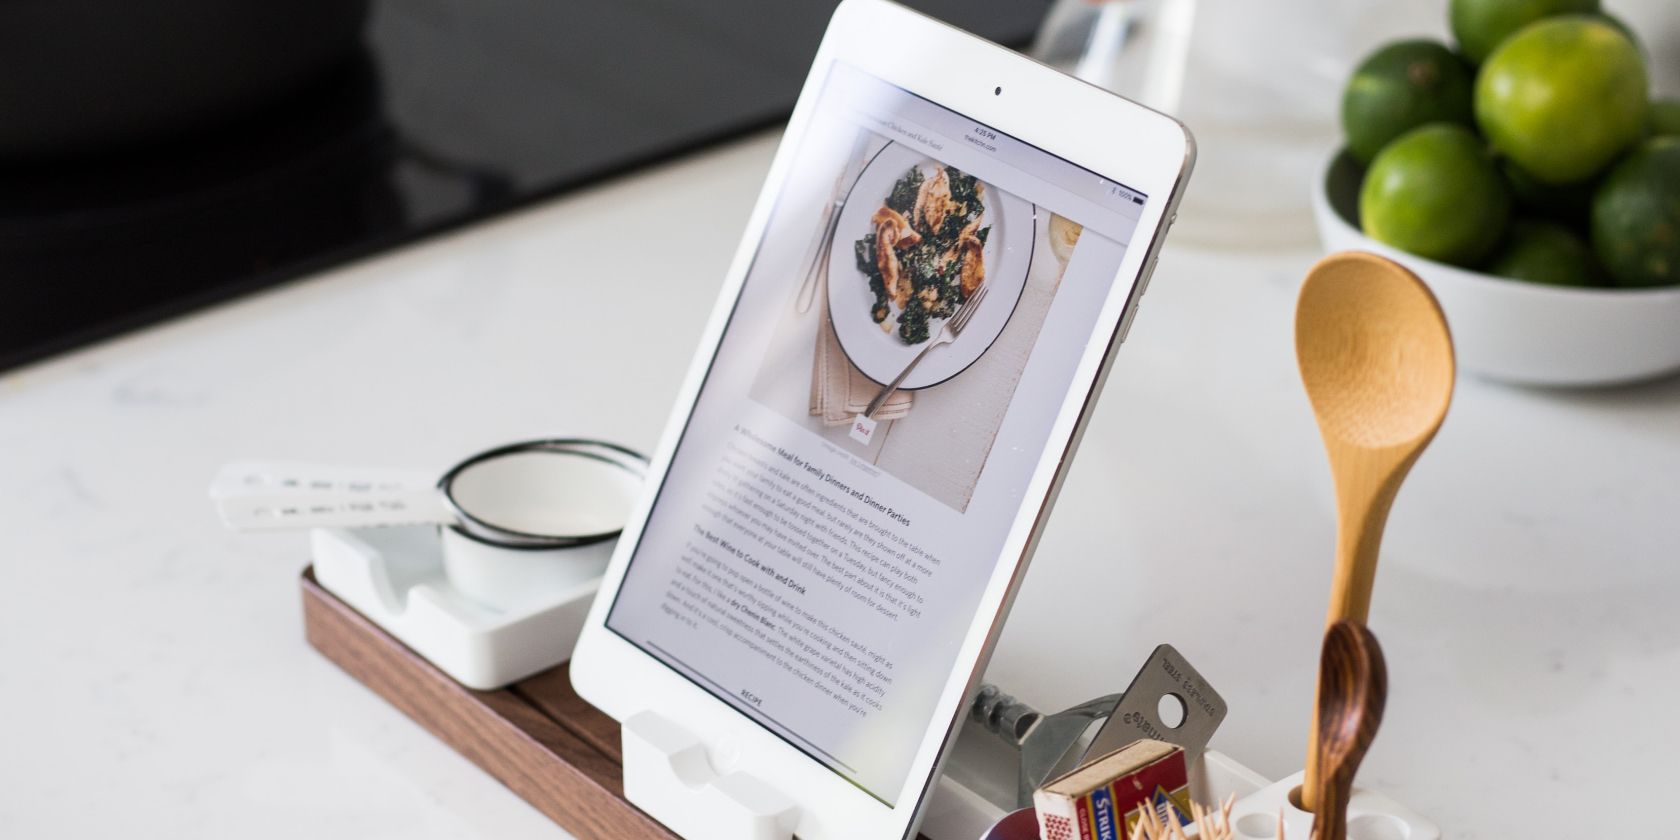 Tablet on a kitchen counter with a wooden spoon